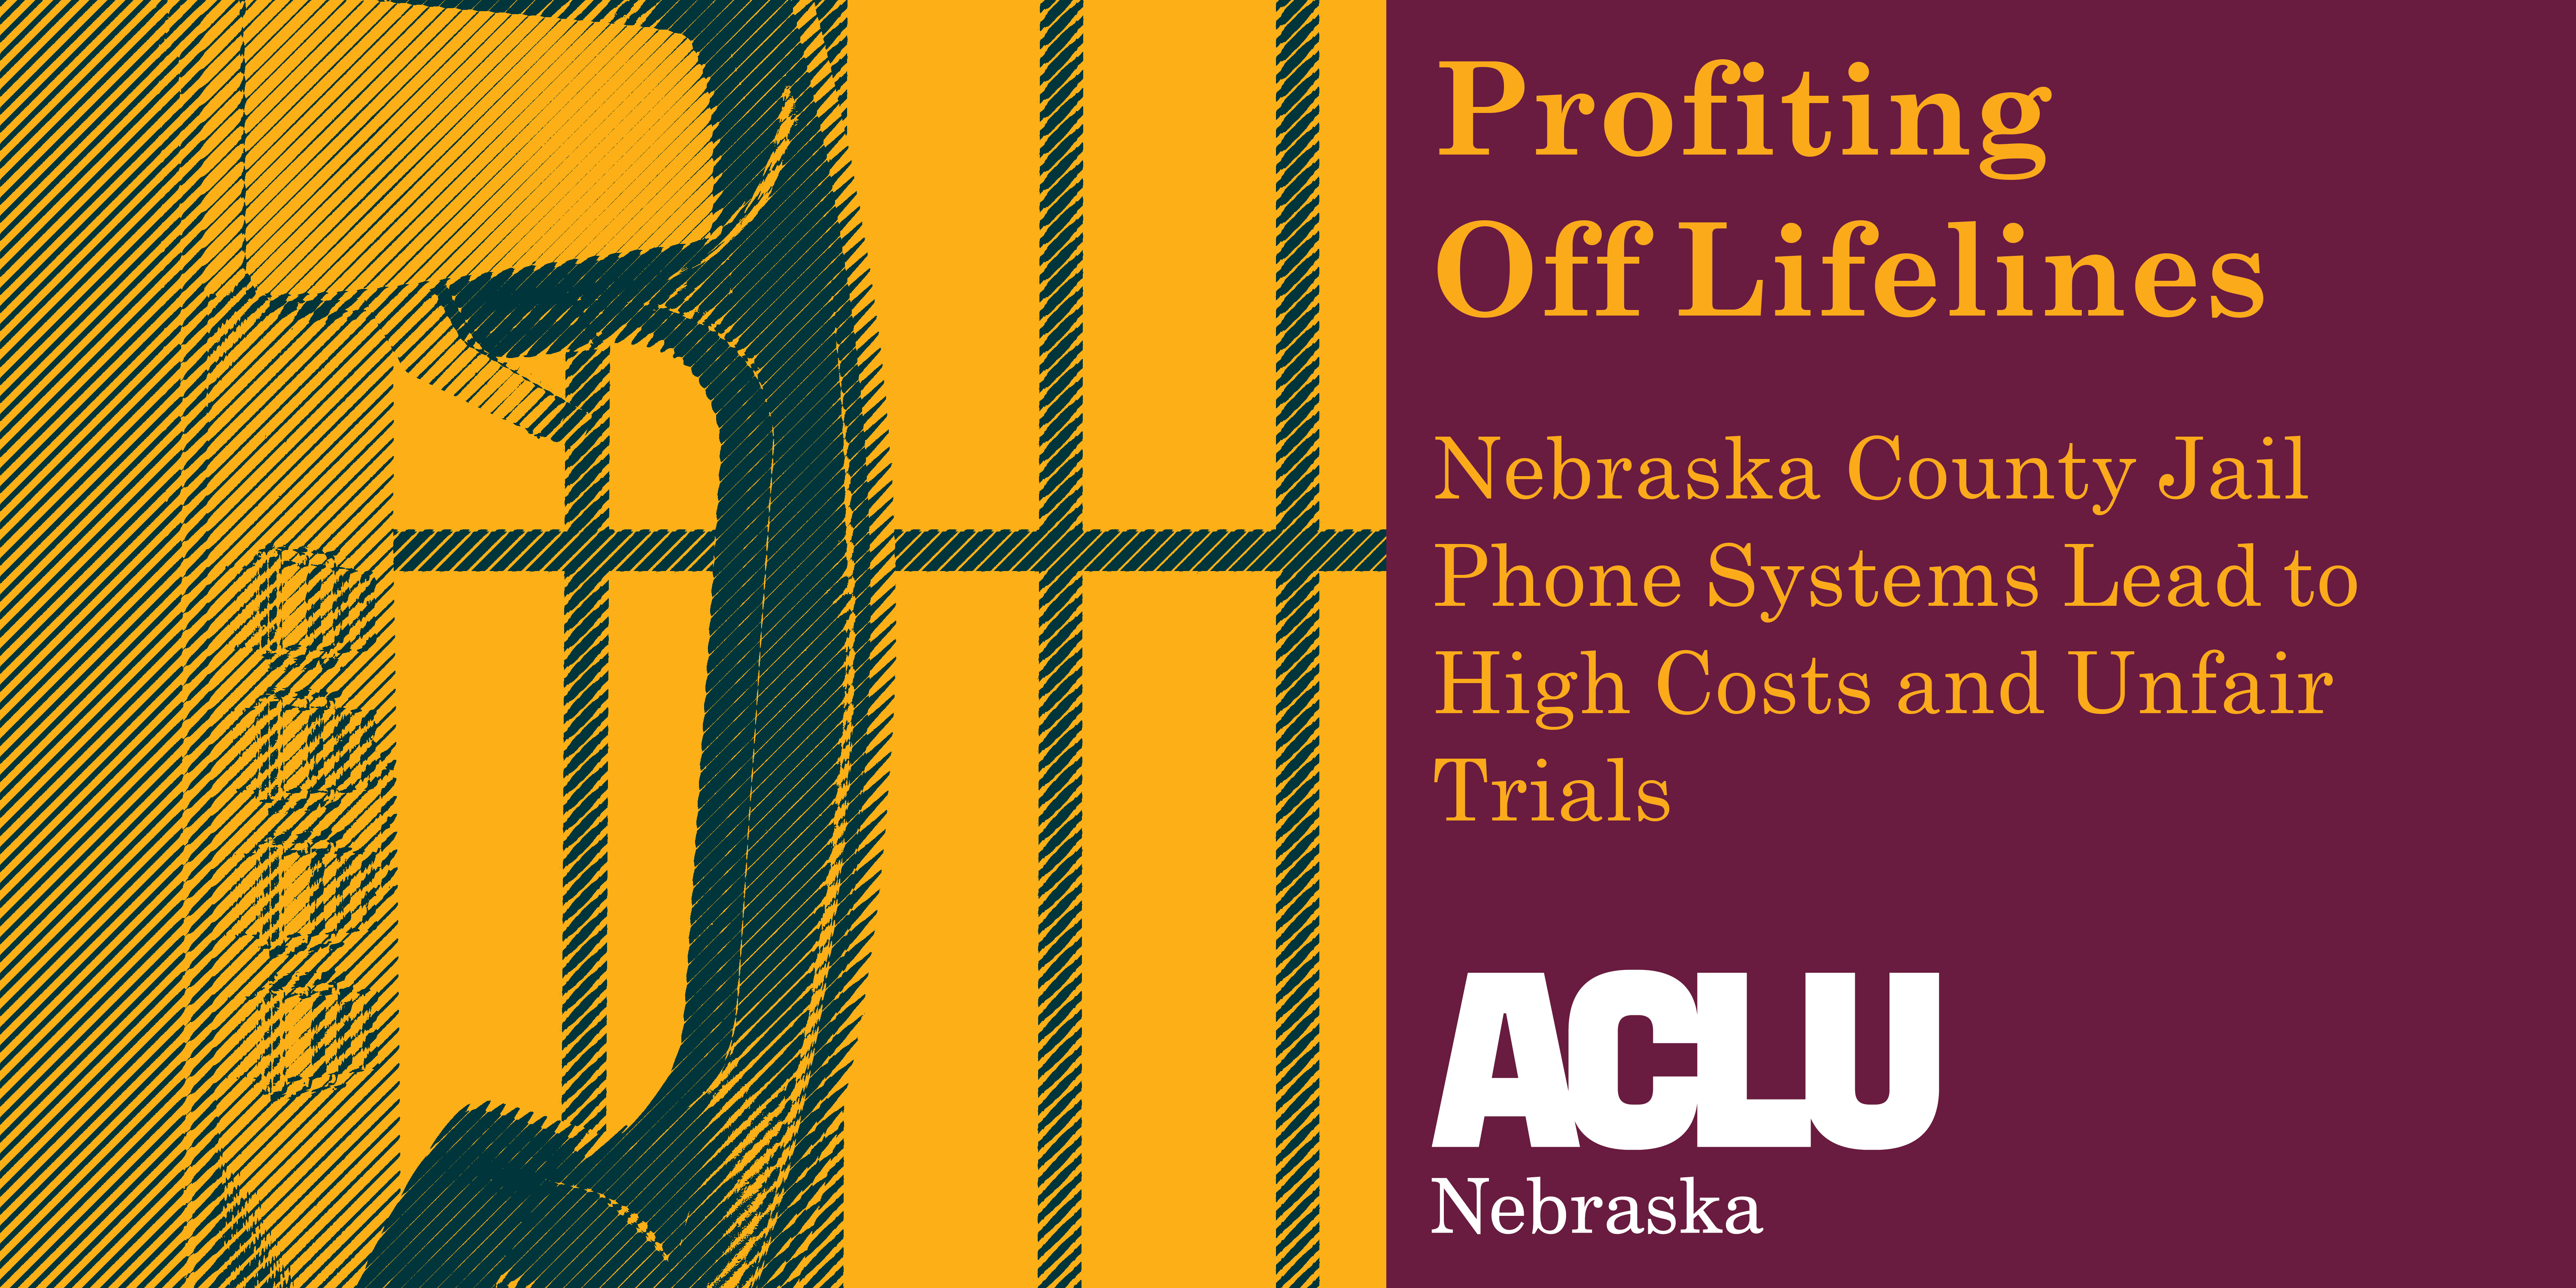 Title Image: Profiting Off Lifelines: Nebraska County Jail Phone Systems Lead to High Costs and Unfair Trials